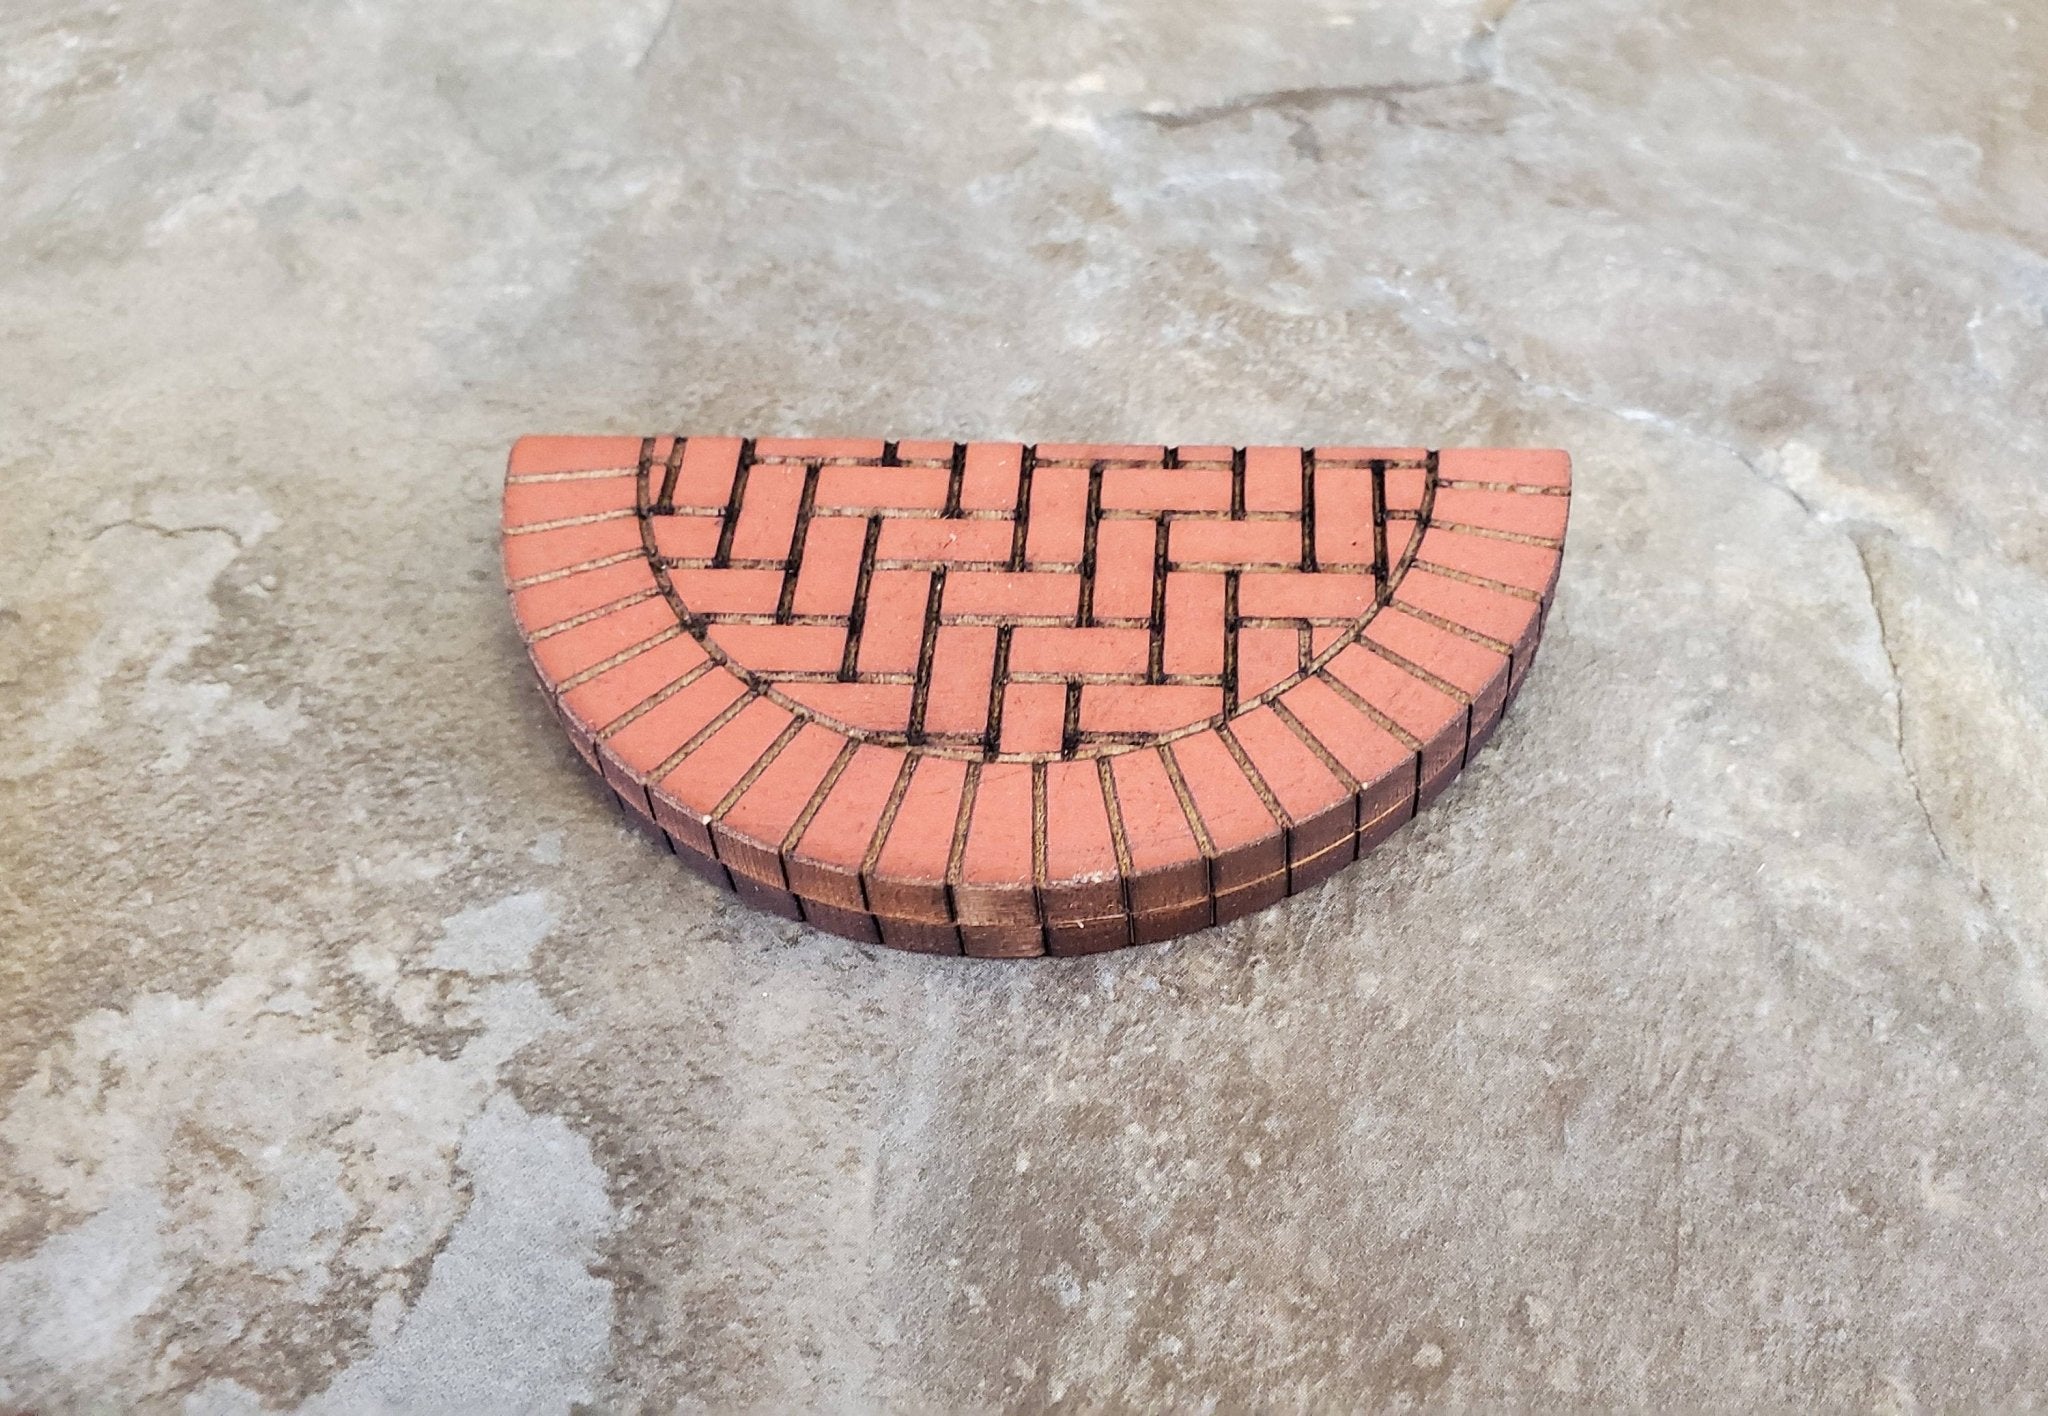 EASY miniature Brick in ANY style • 1:12, 1:6 or 1:24 scale 